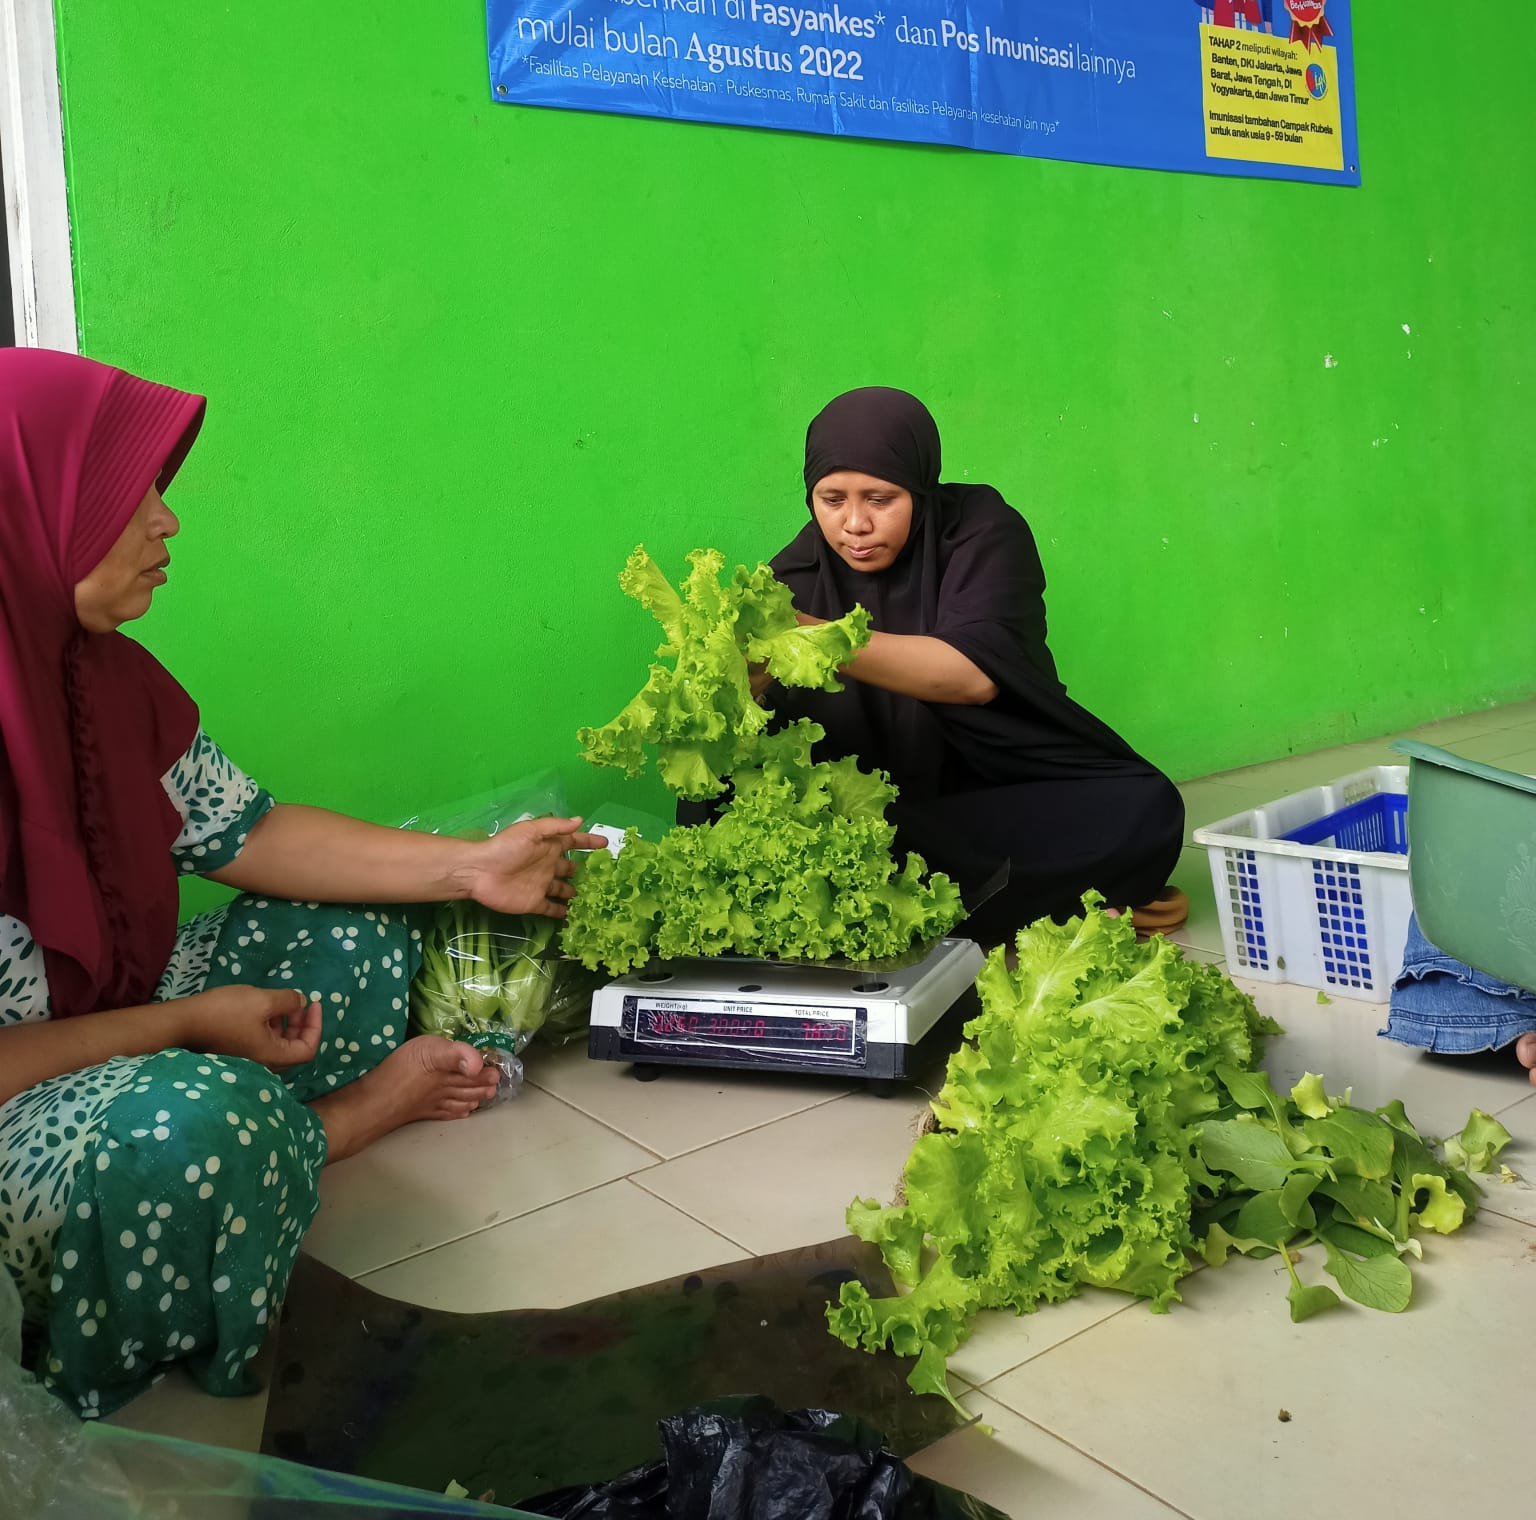 Human Initiative to Empower Villages in Bogor through Food Security Program